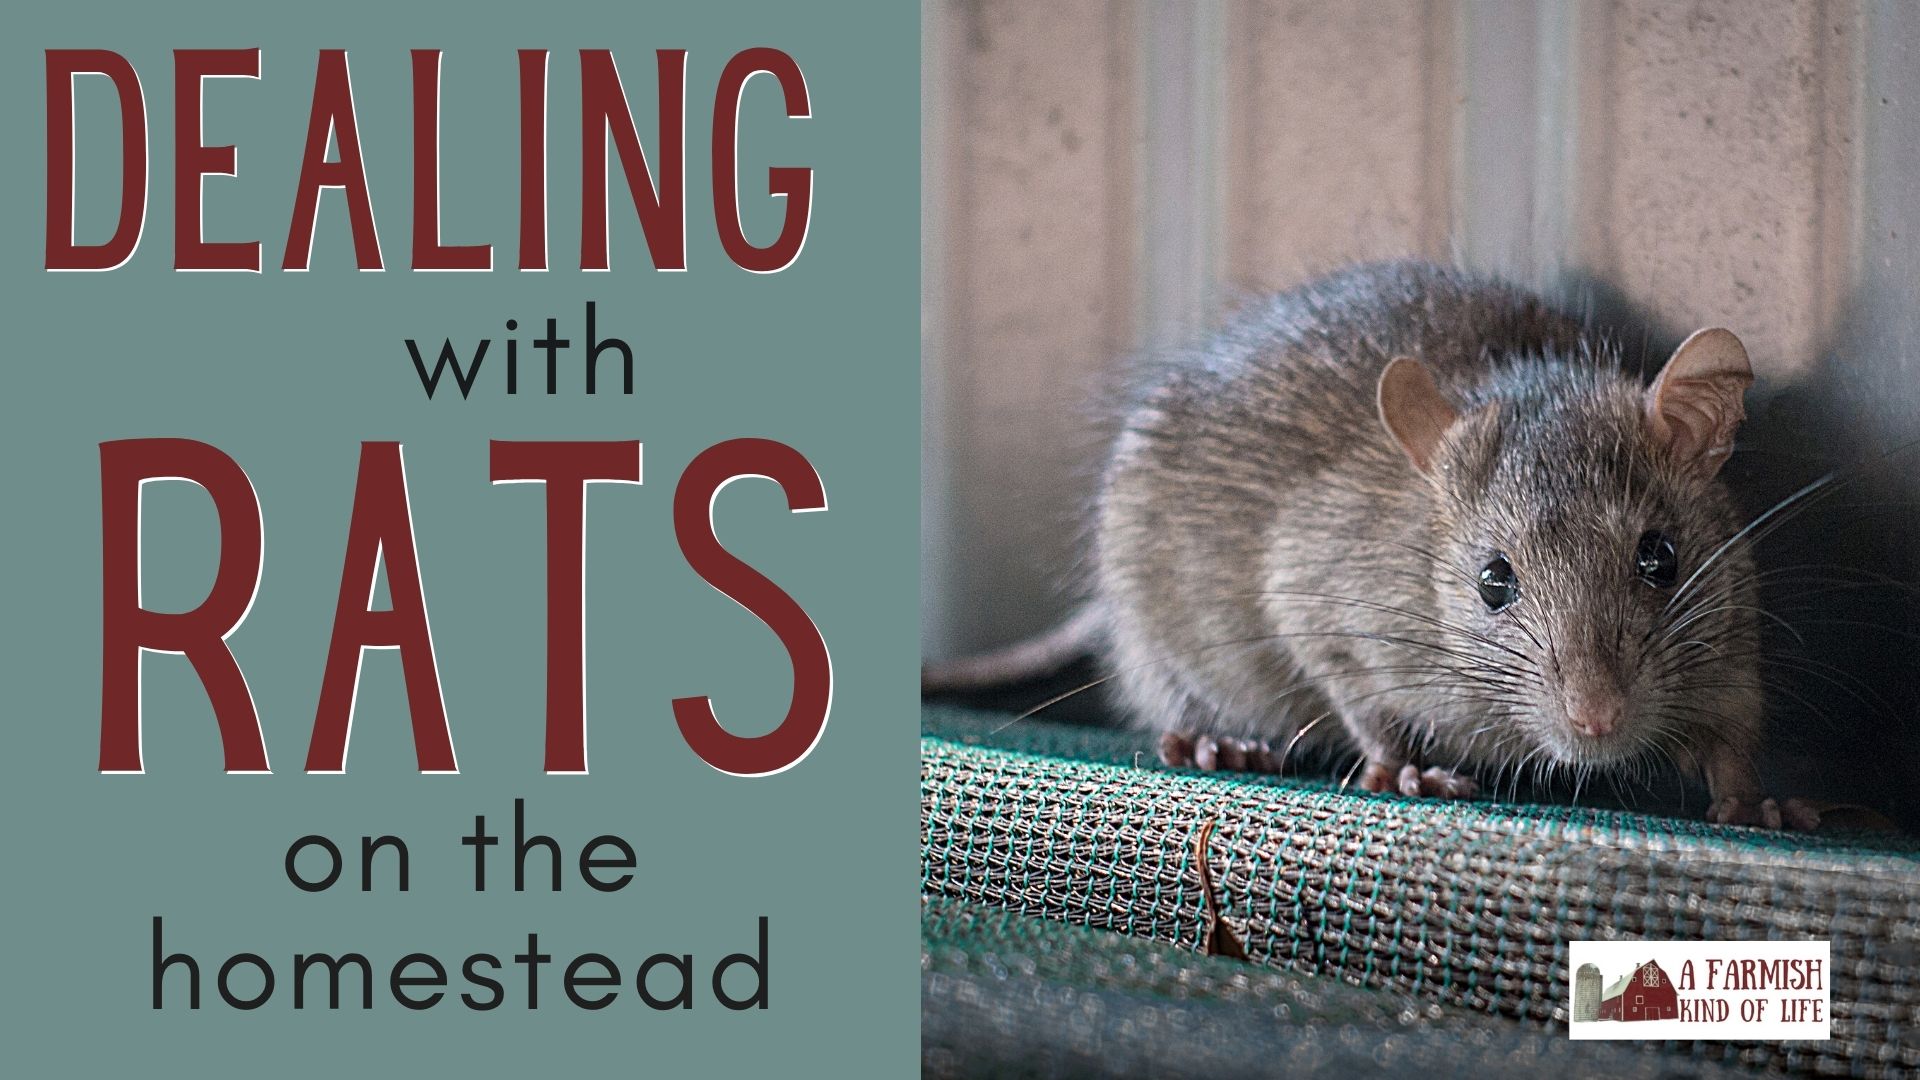 188: At War with Rats on the Homestead